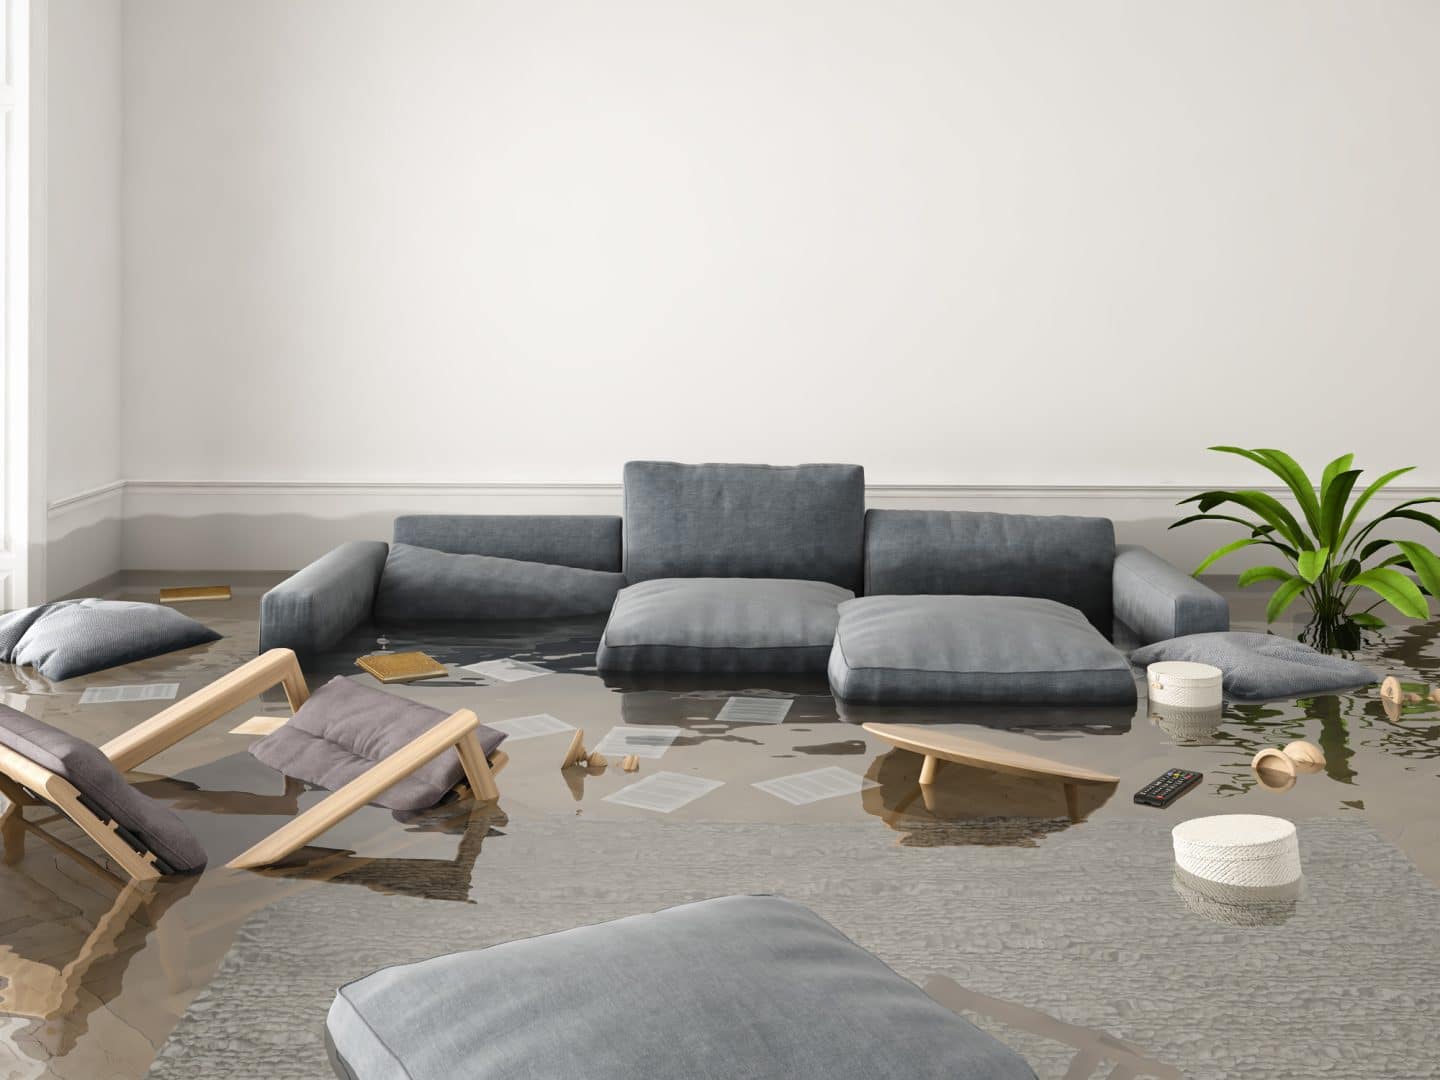 What You Need to Know About Water Damage Claims in California